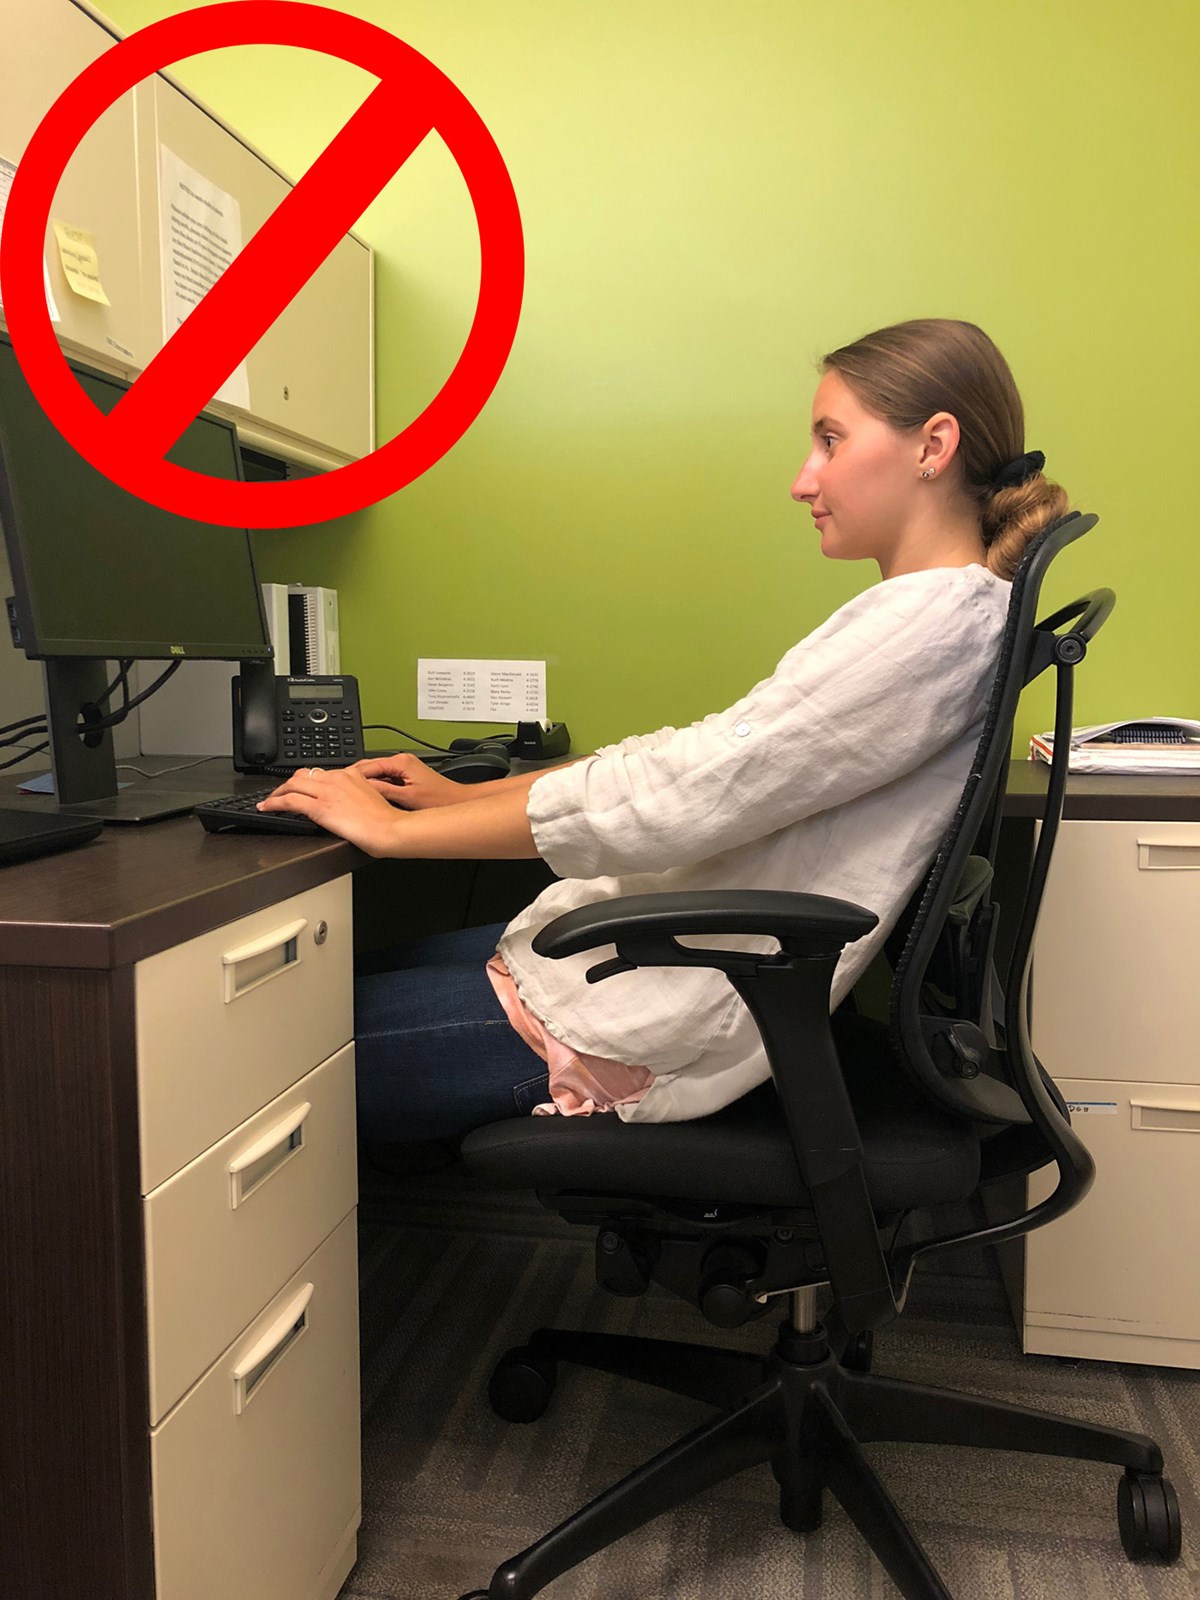 A no sign over a picture of a woman slouching in her chair so that her back is not supported by the backrest.